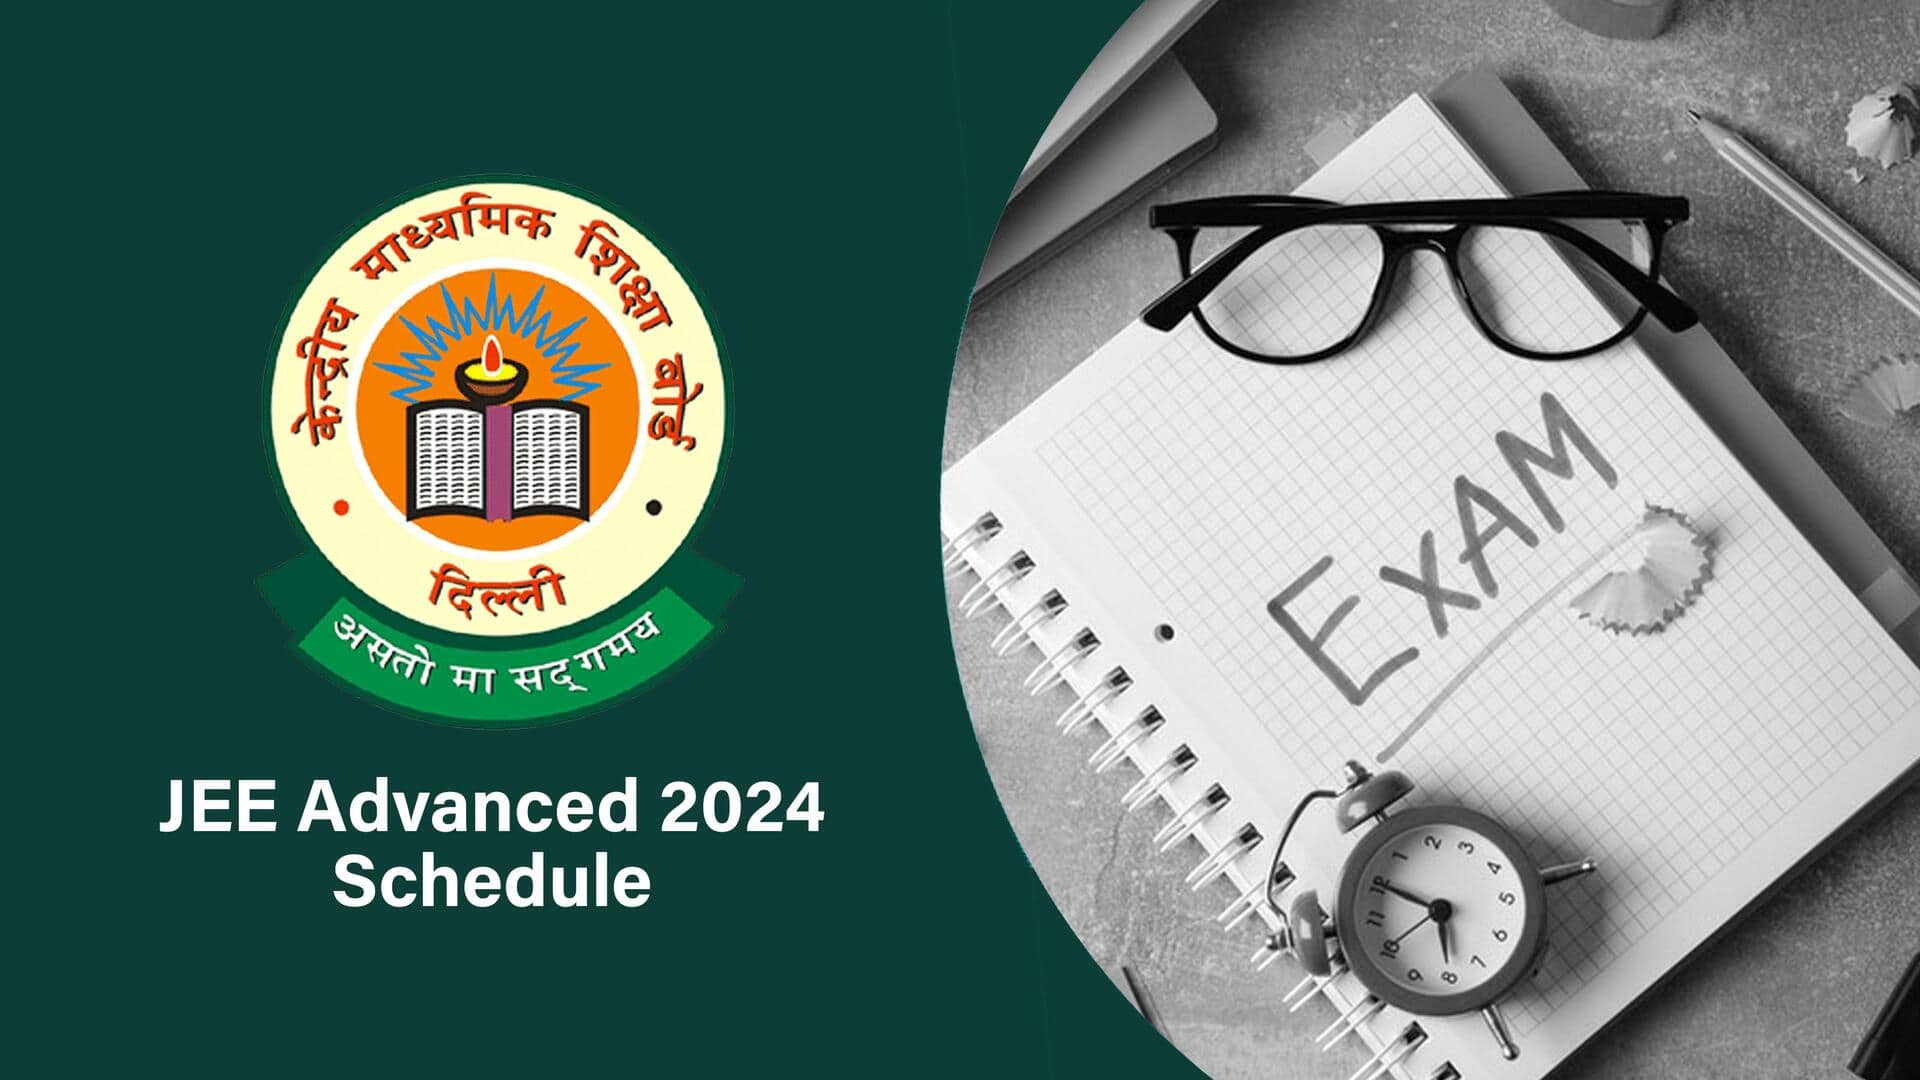 JEE Advanced 2024 schedule announced, exam on May 26